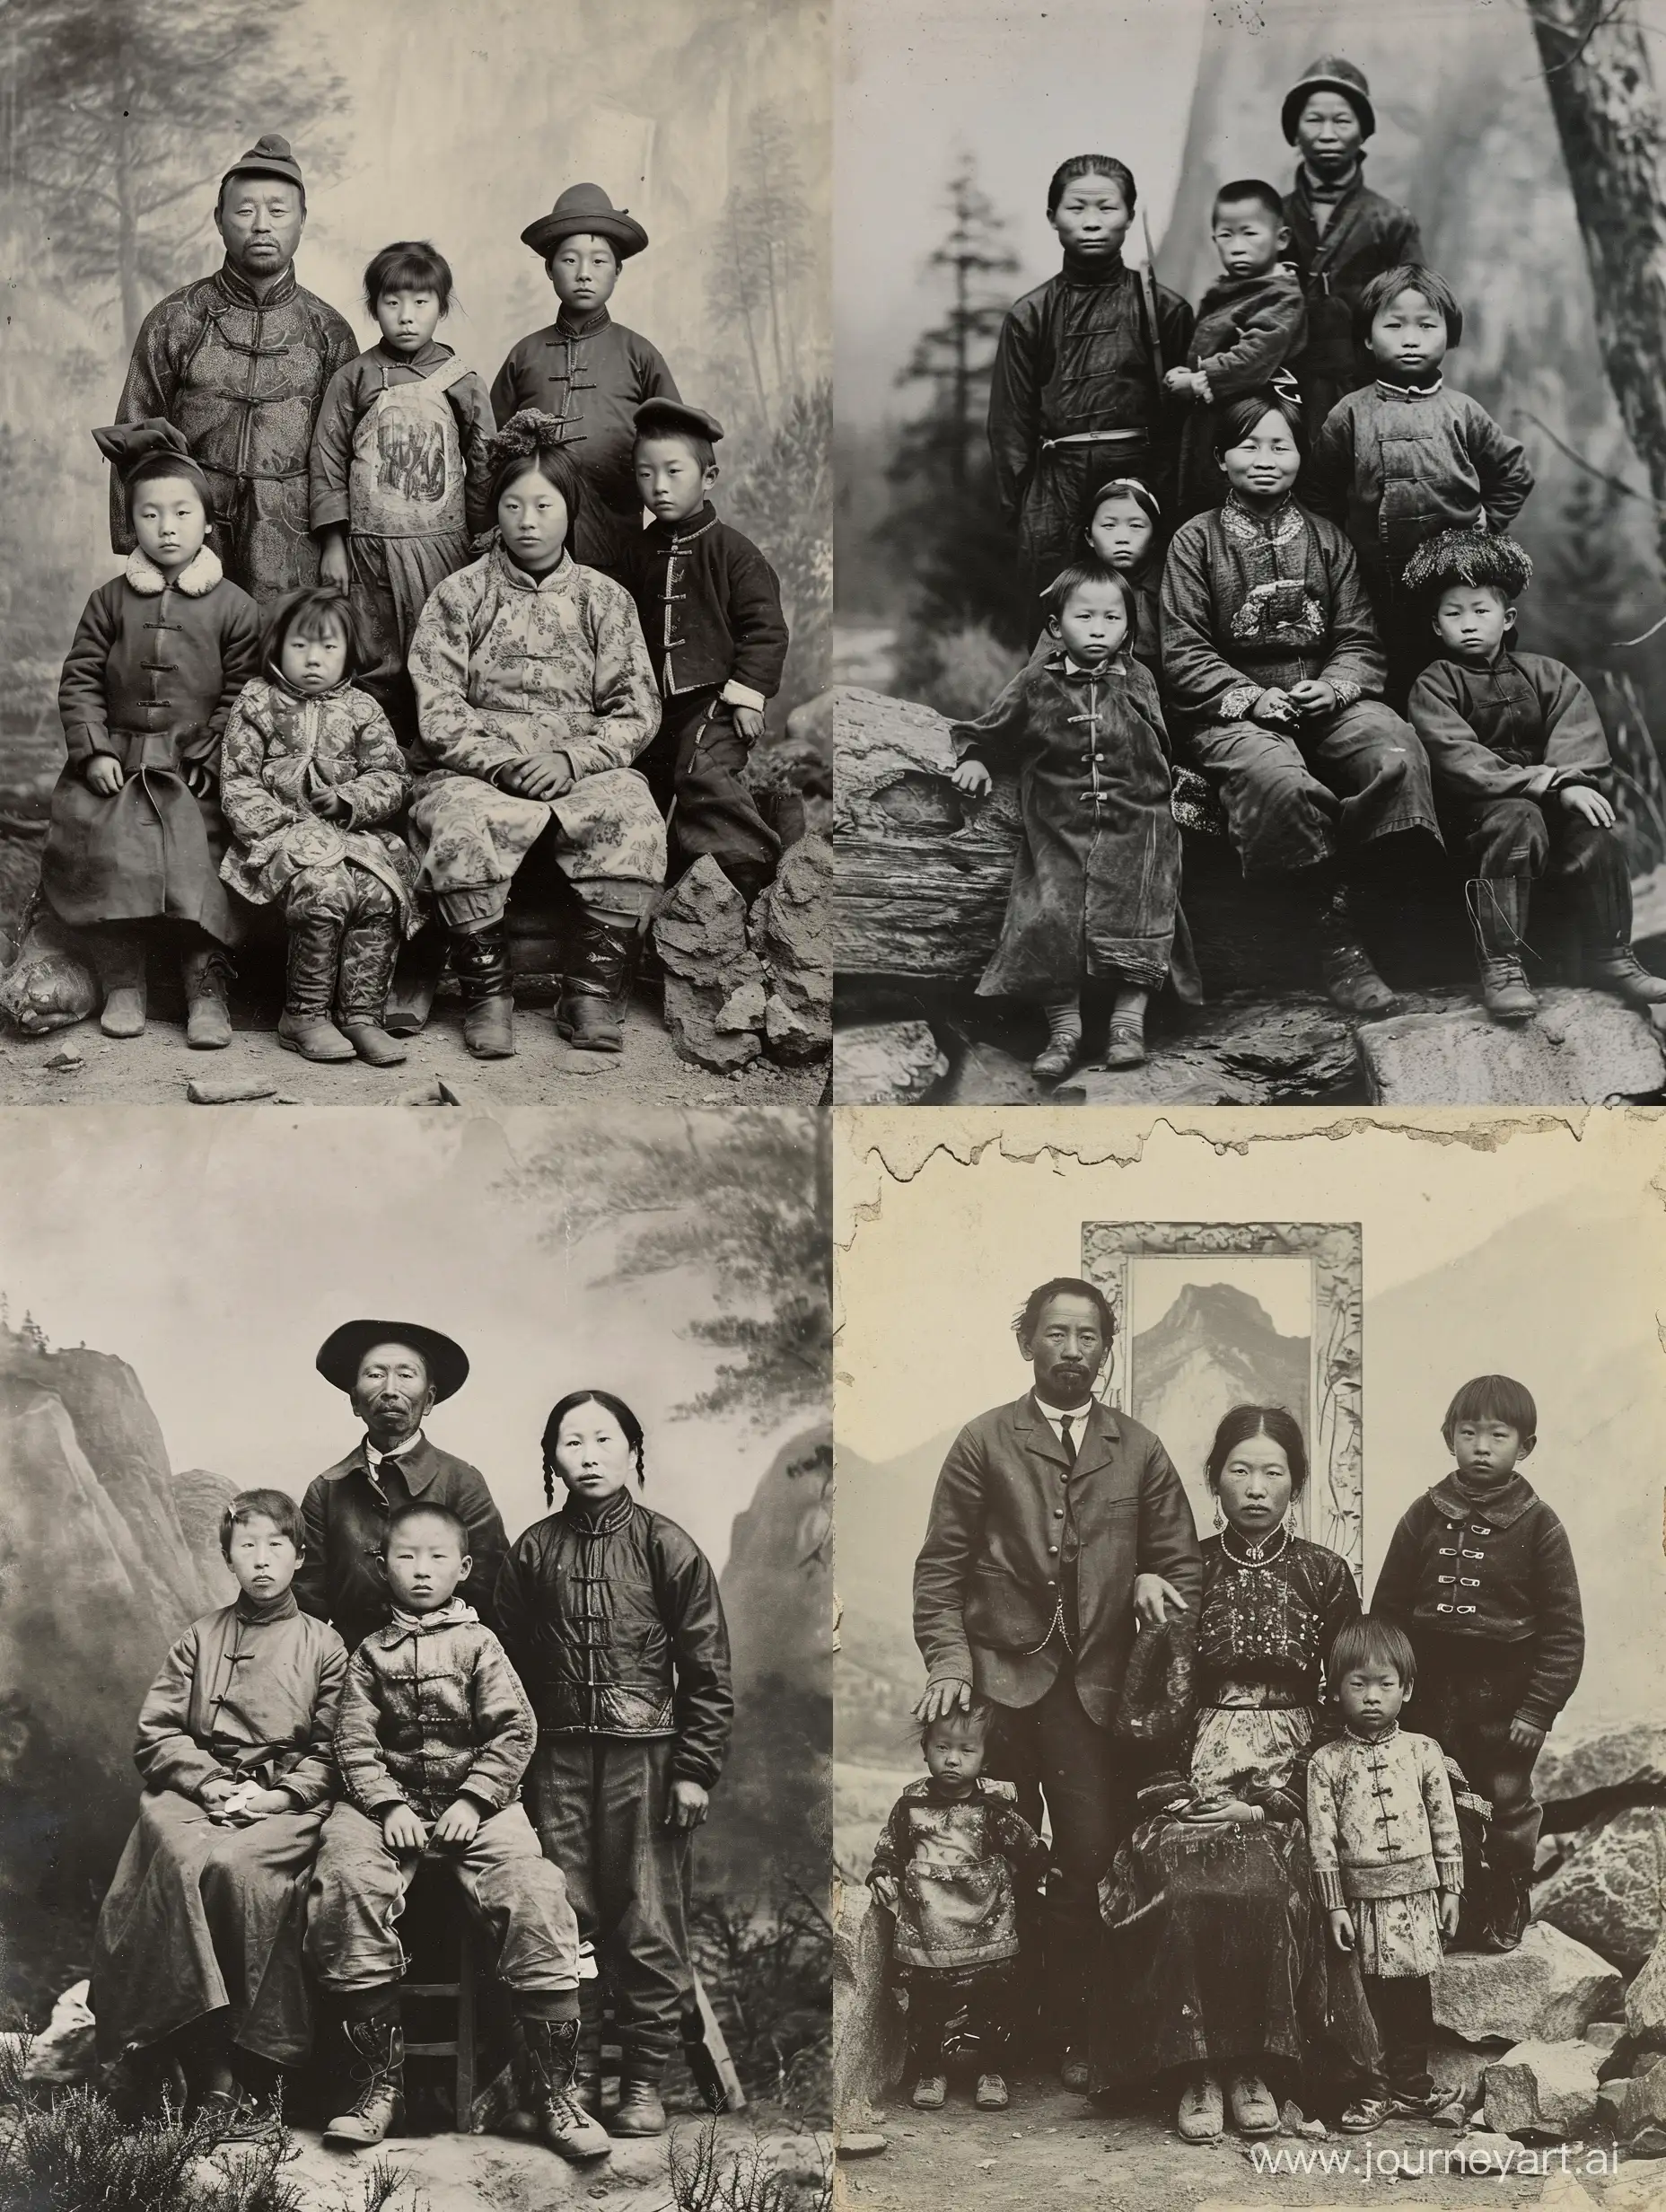 Historical black and white photographs dipicting a detail shot of a Chinese worker's family portrait, who resides at Yosemite in the late 1800s. 